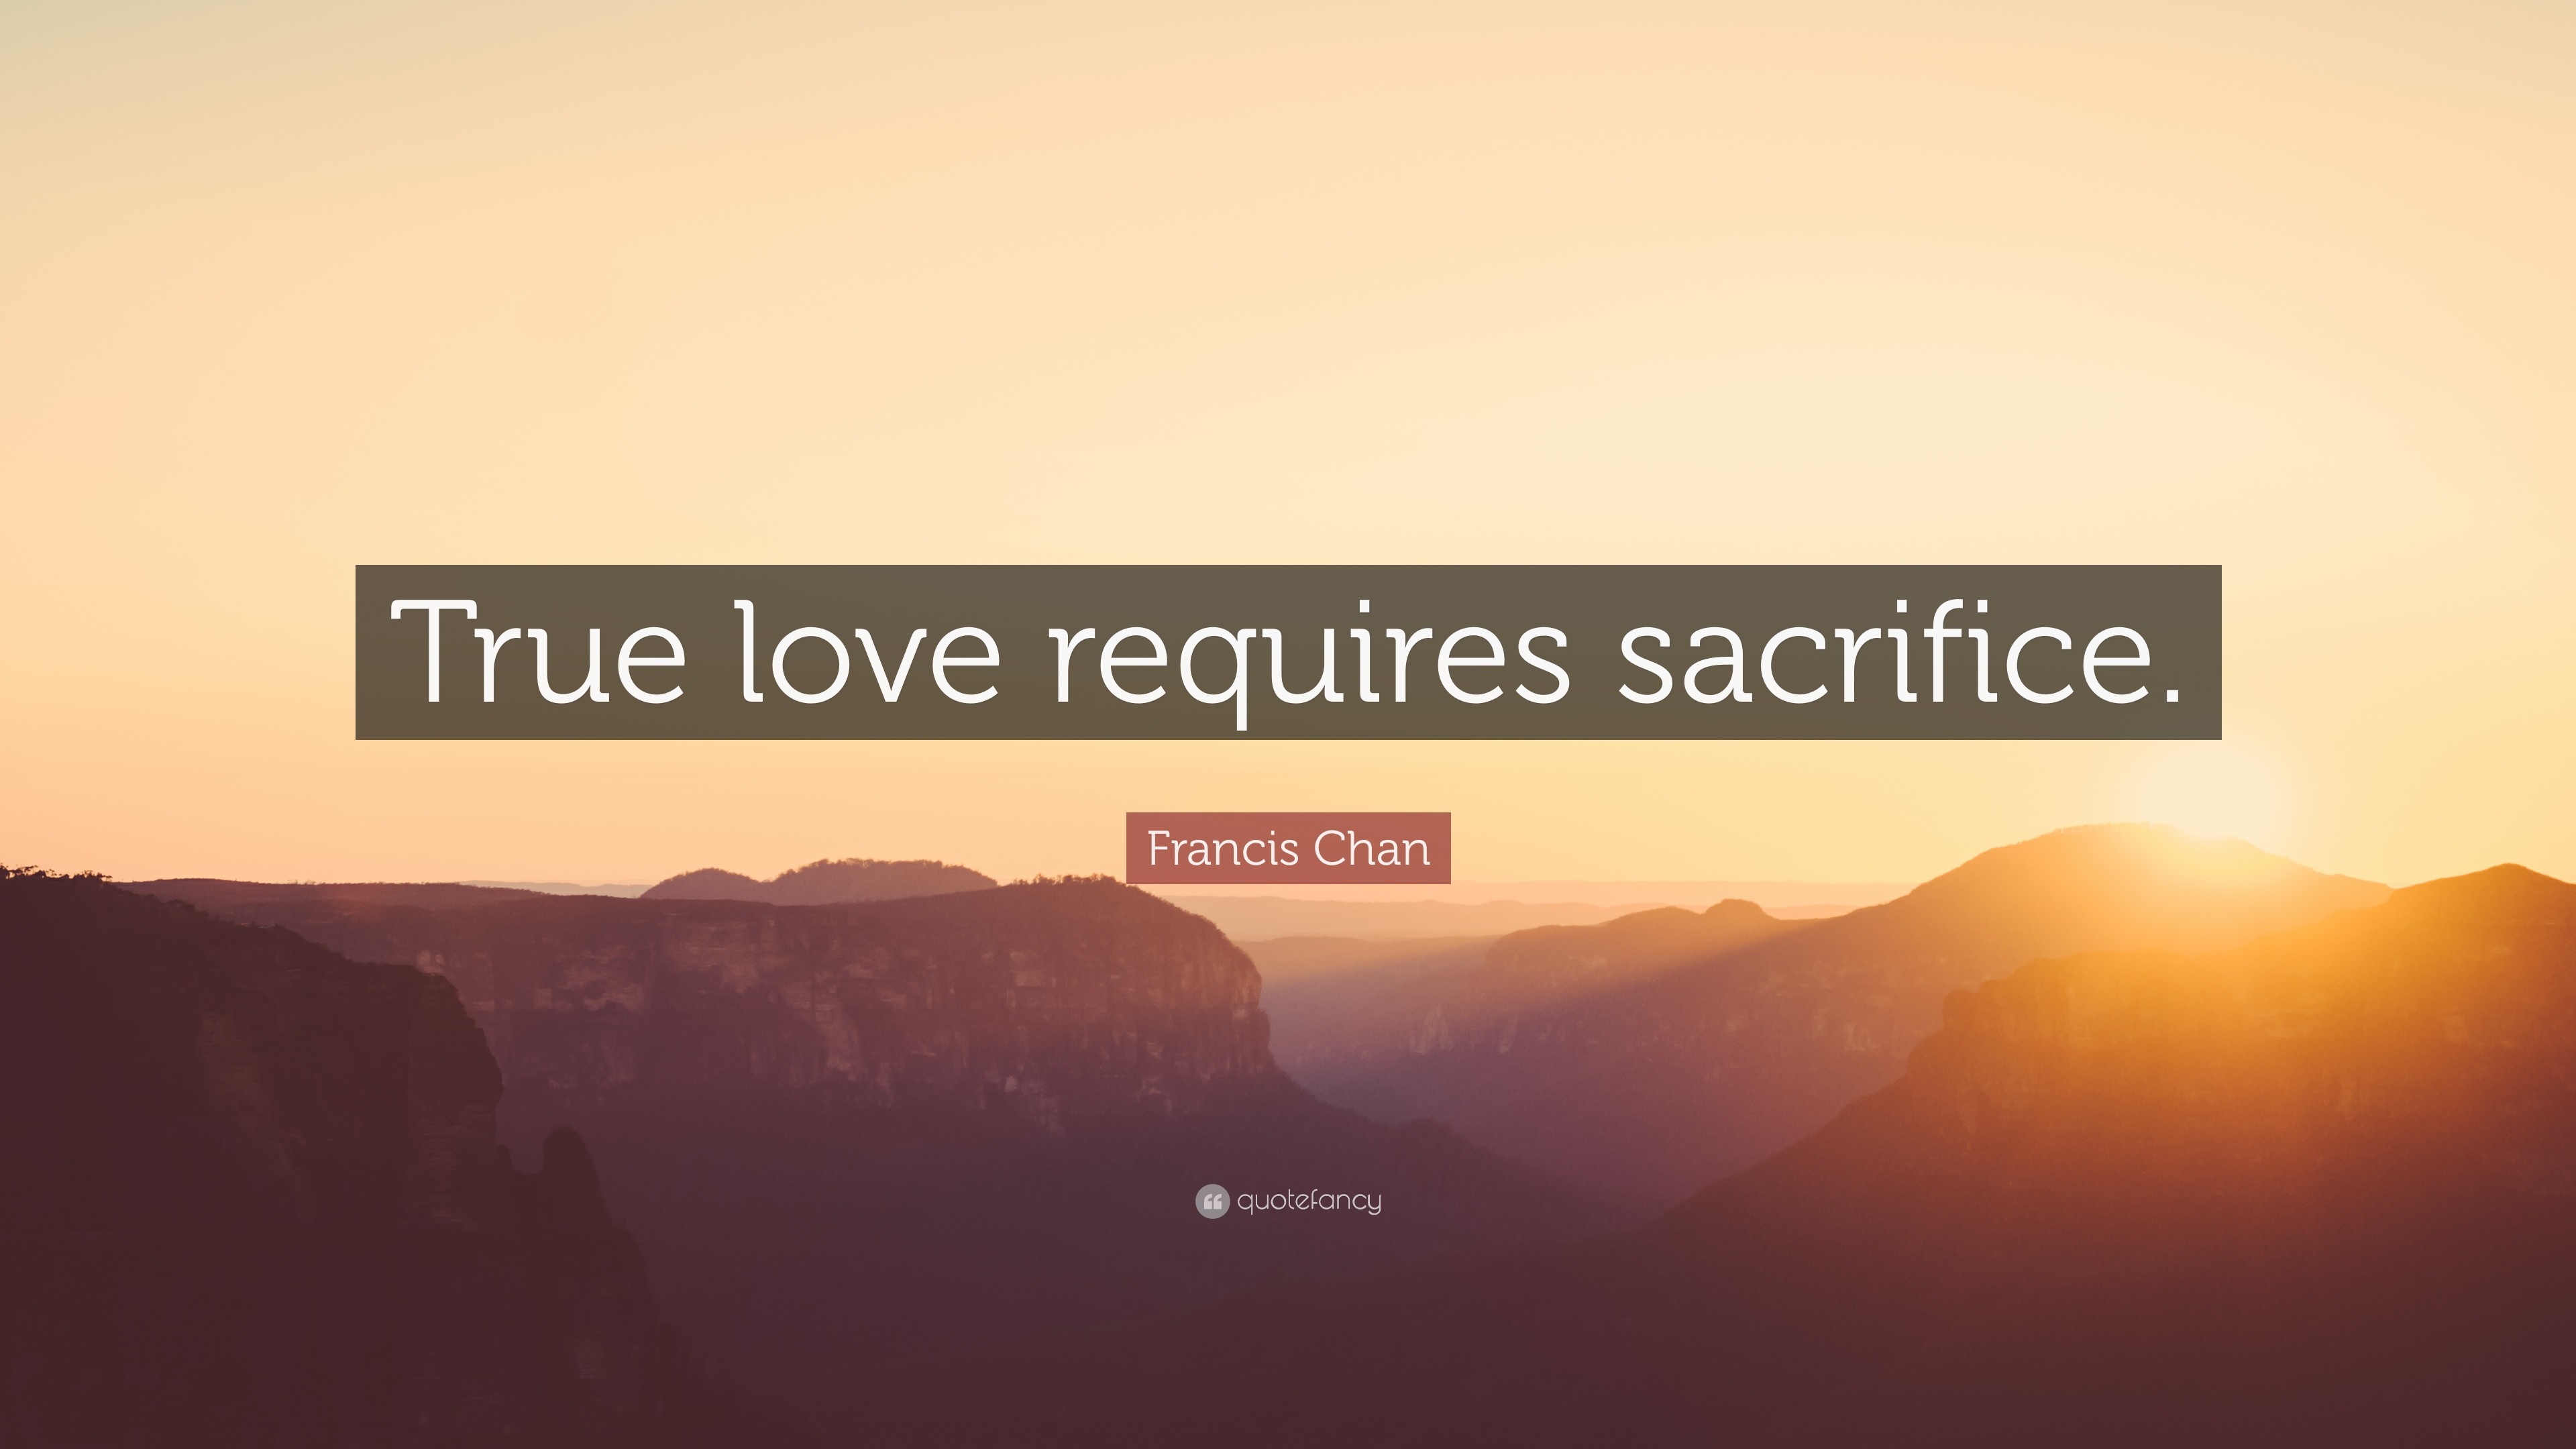 3840x2160 Francis Chan Quote: “True love requires sacrifice.”